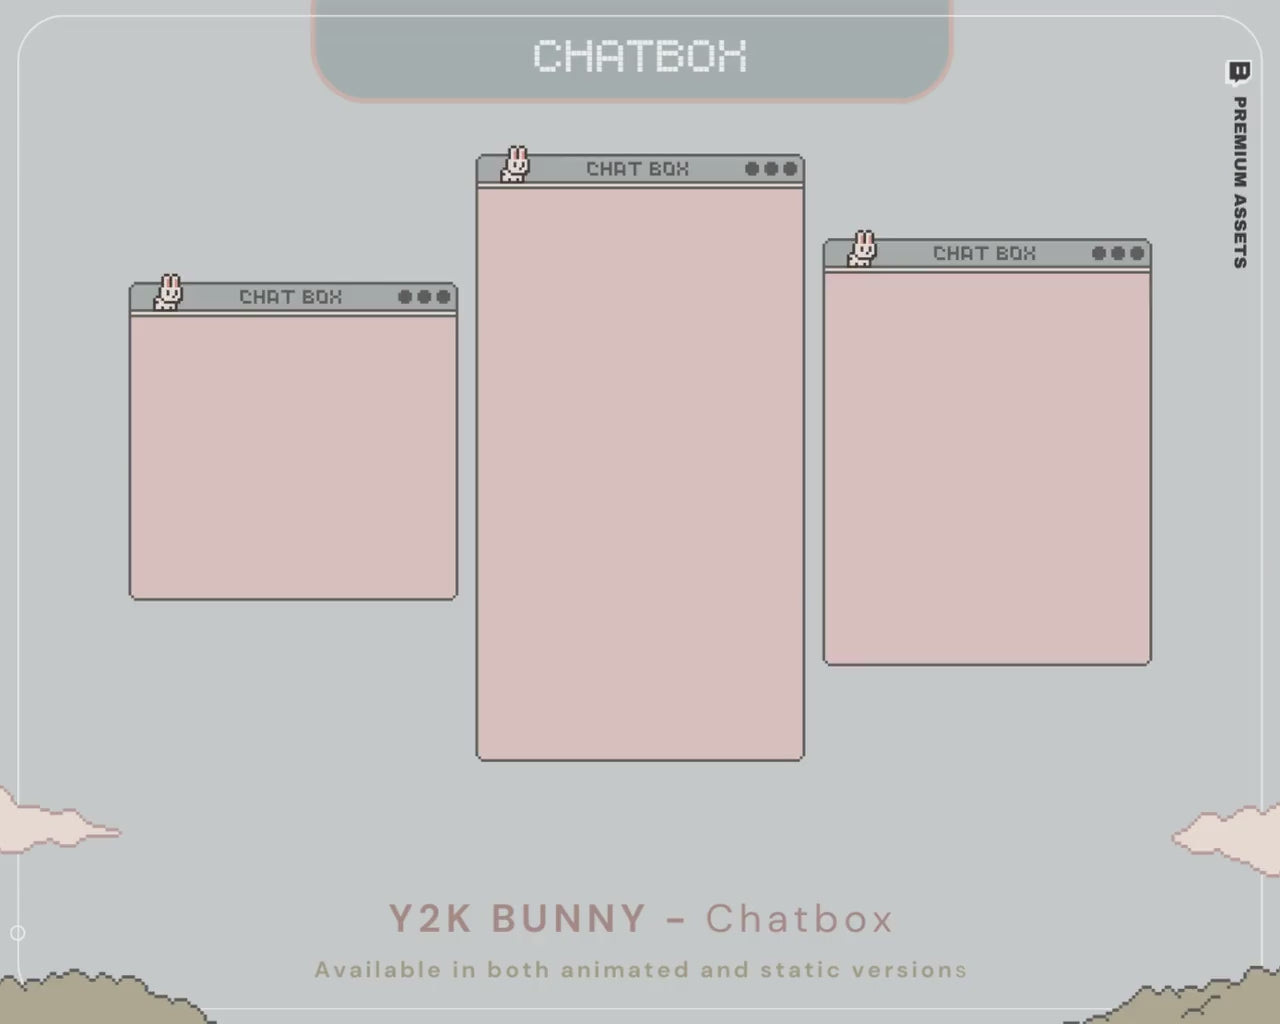 Animated Twitch Chatbox Animation Bunny Chat Stream Overlay Pixel Cozy Lofi Cute Rabbit Cat Stream Vtubber Kick Youtube Live Streaming